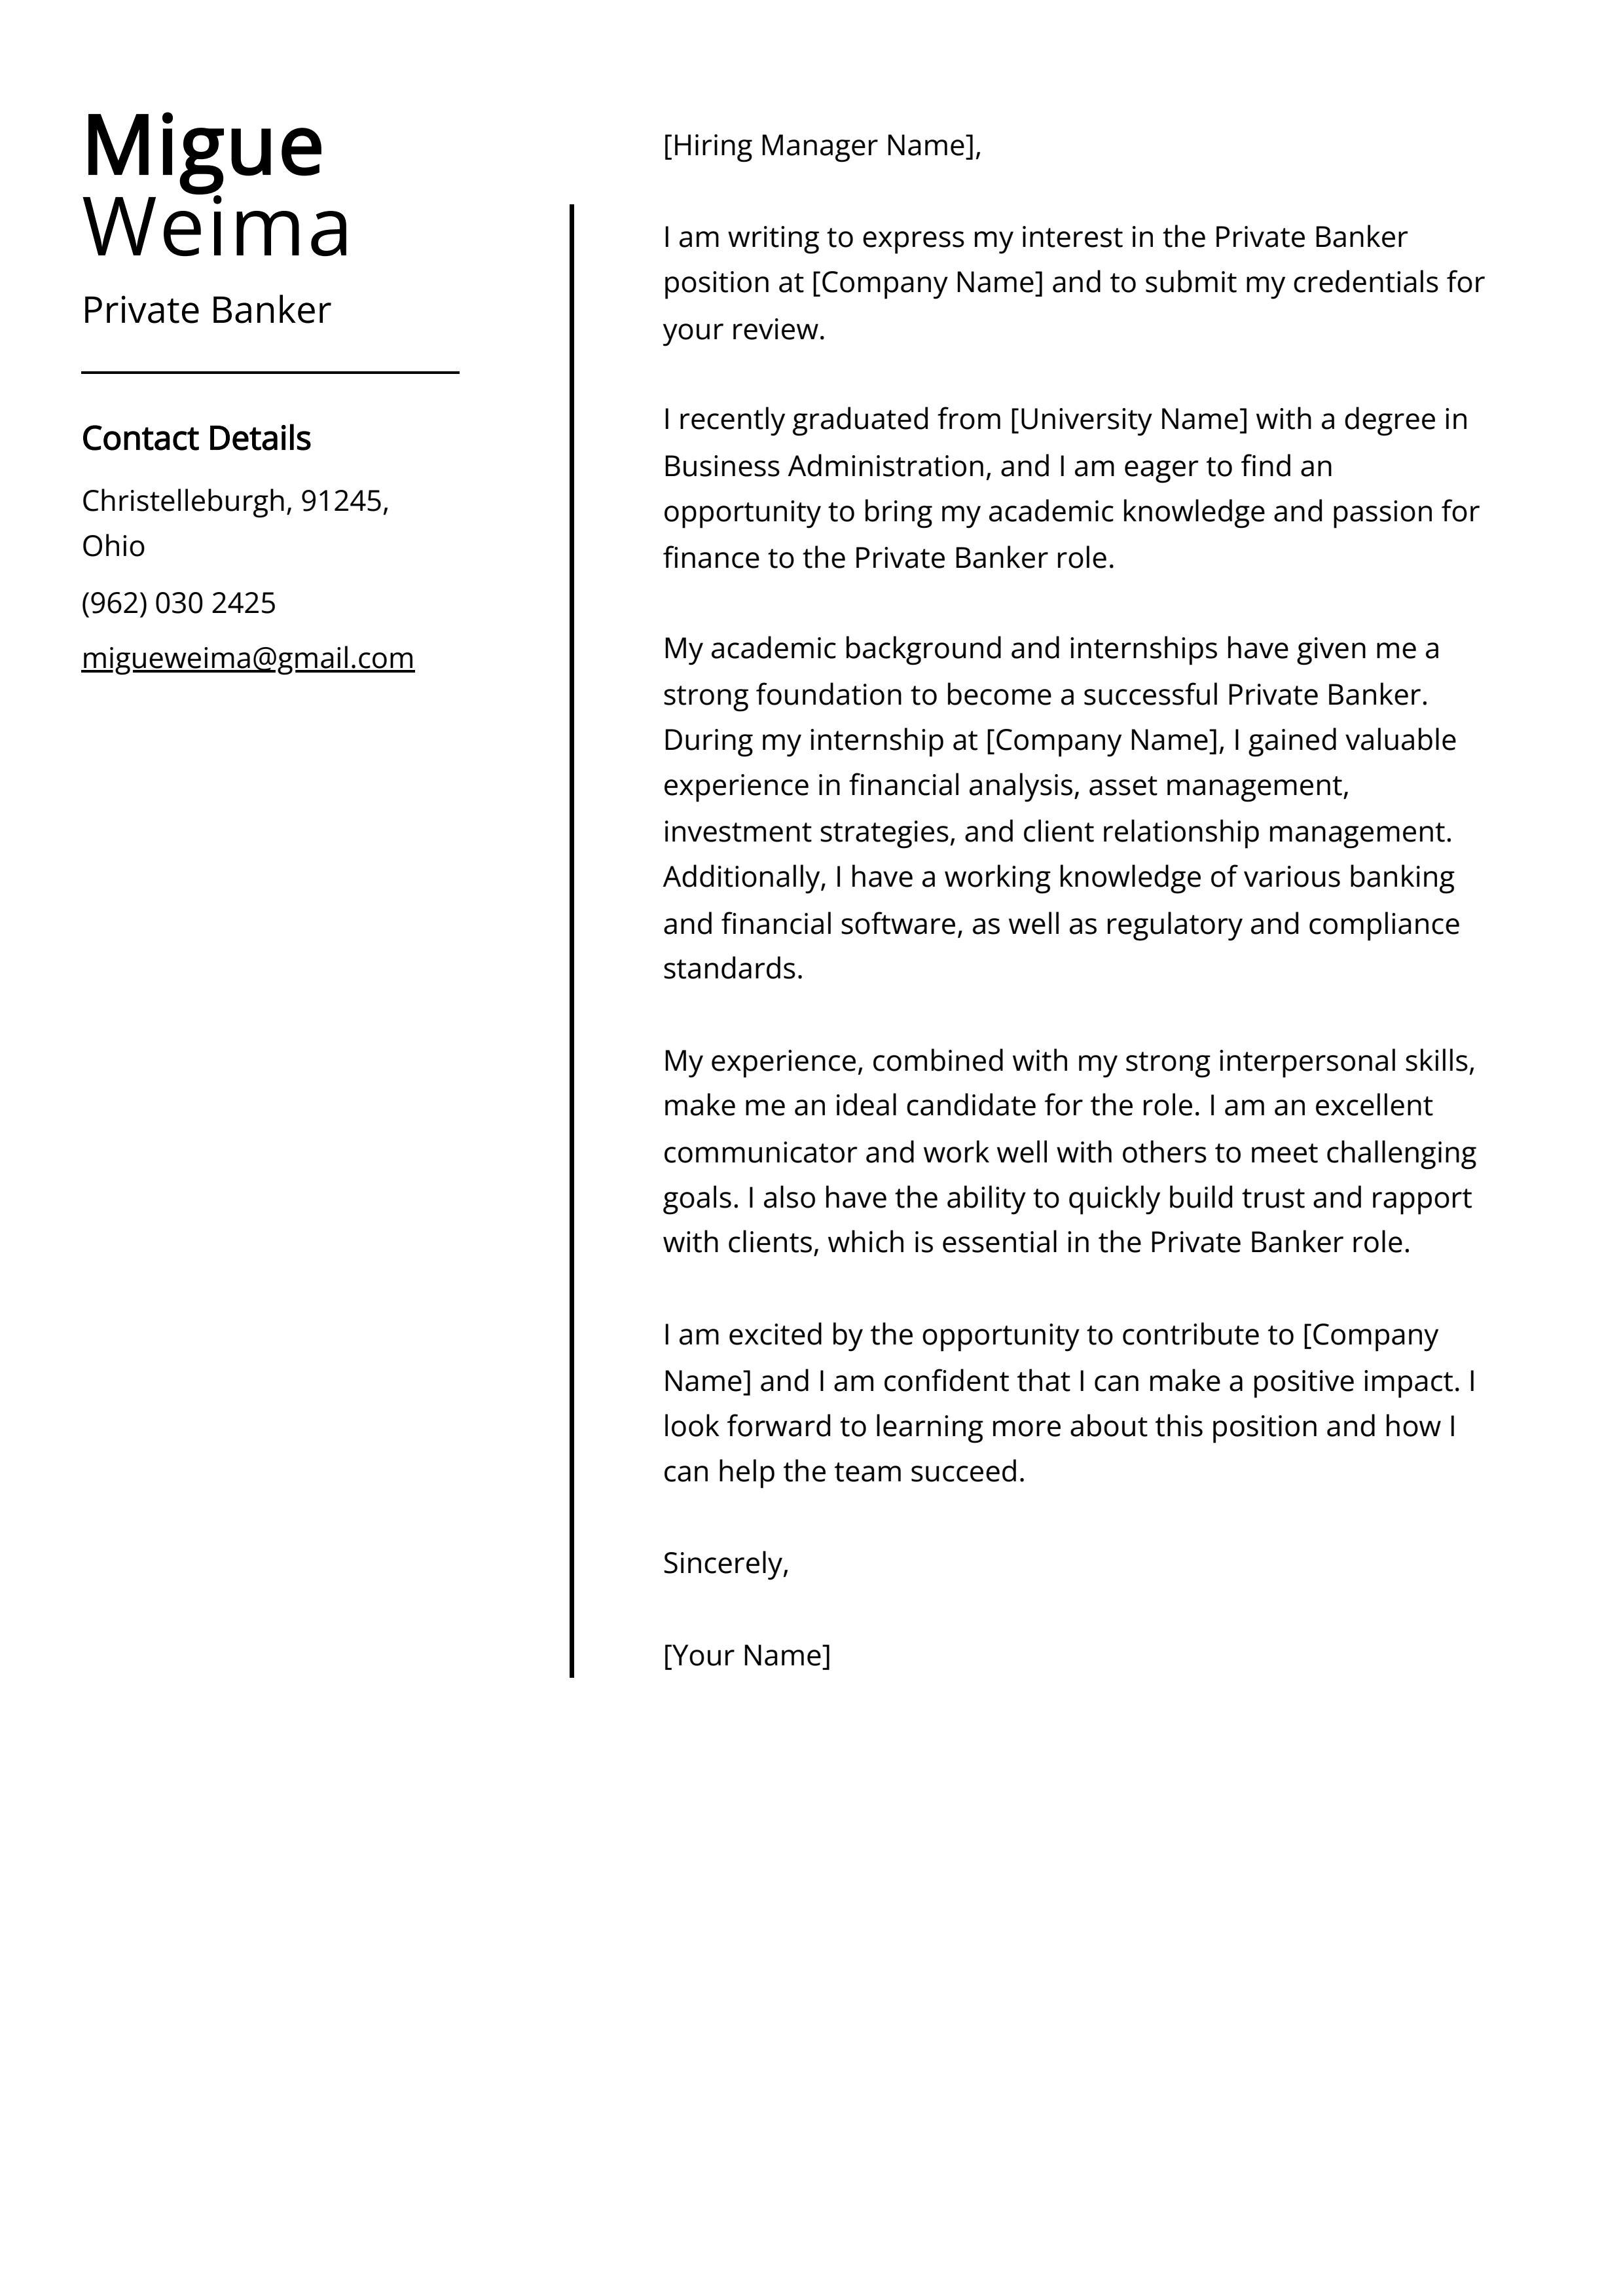 Private Banker Cover Letter Example